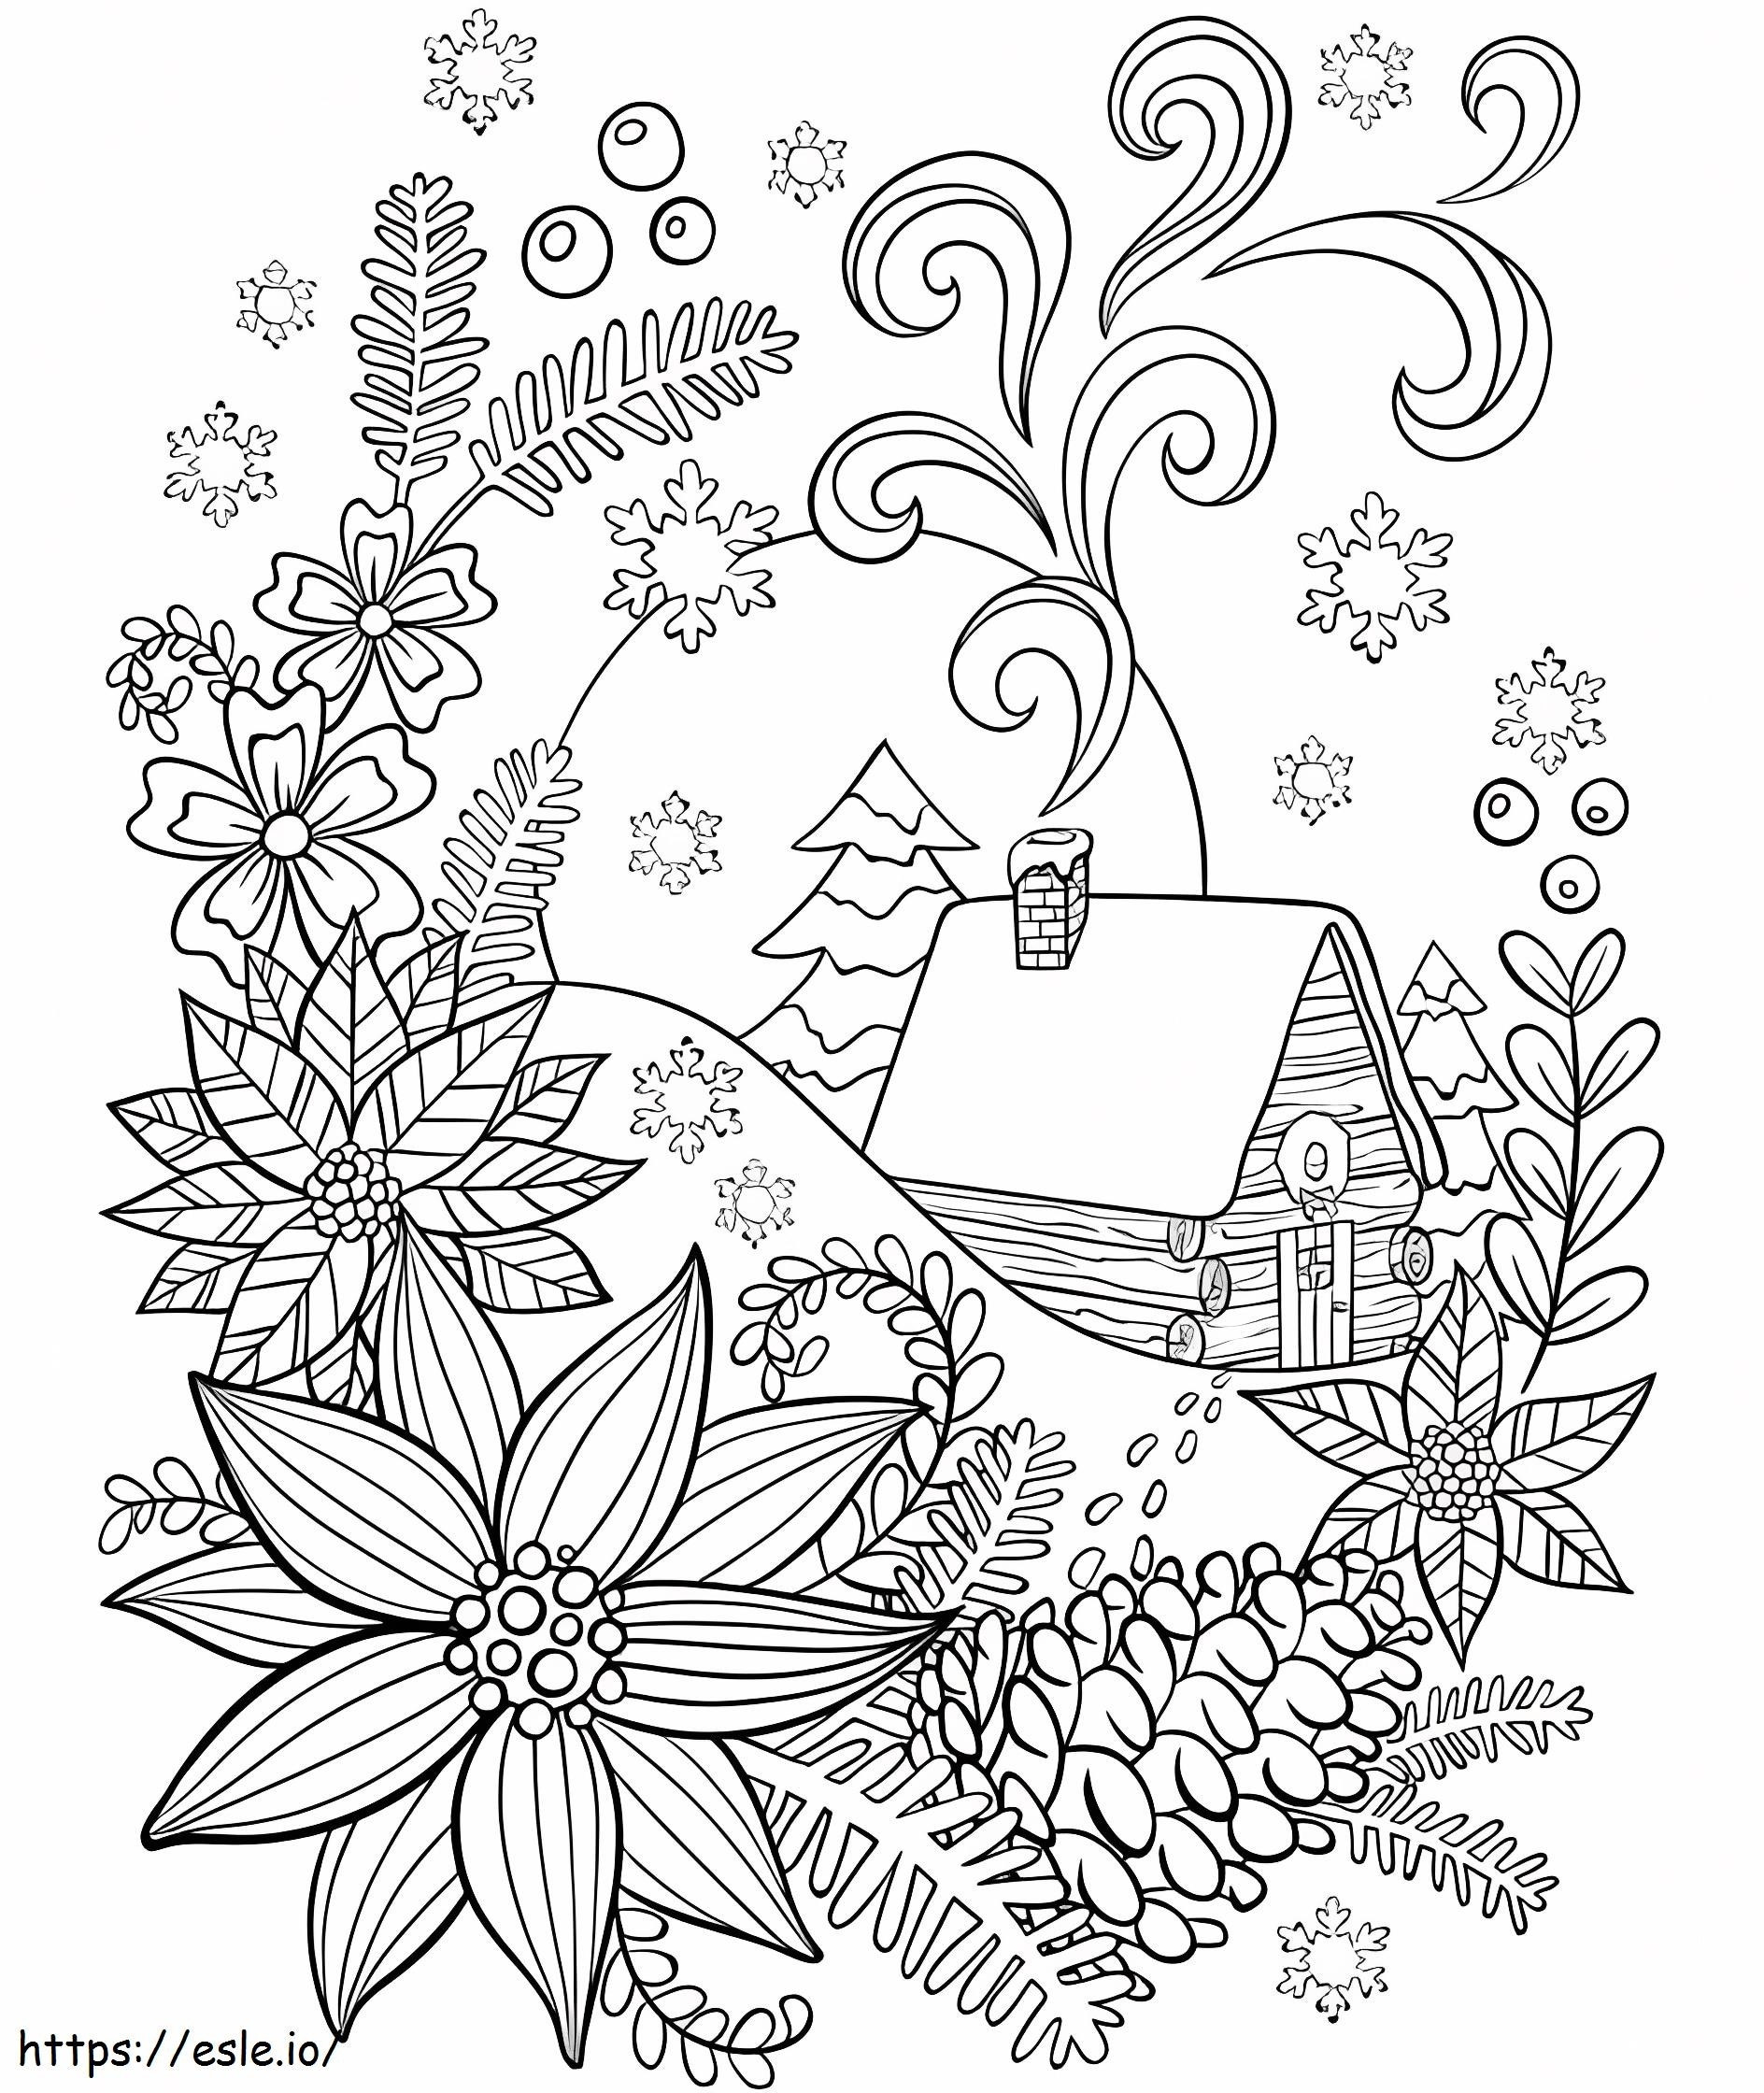 Cabin In The Snow coloring page